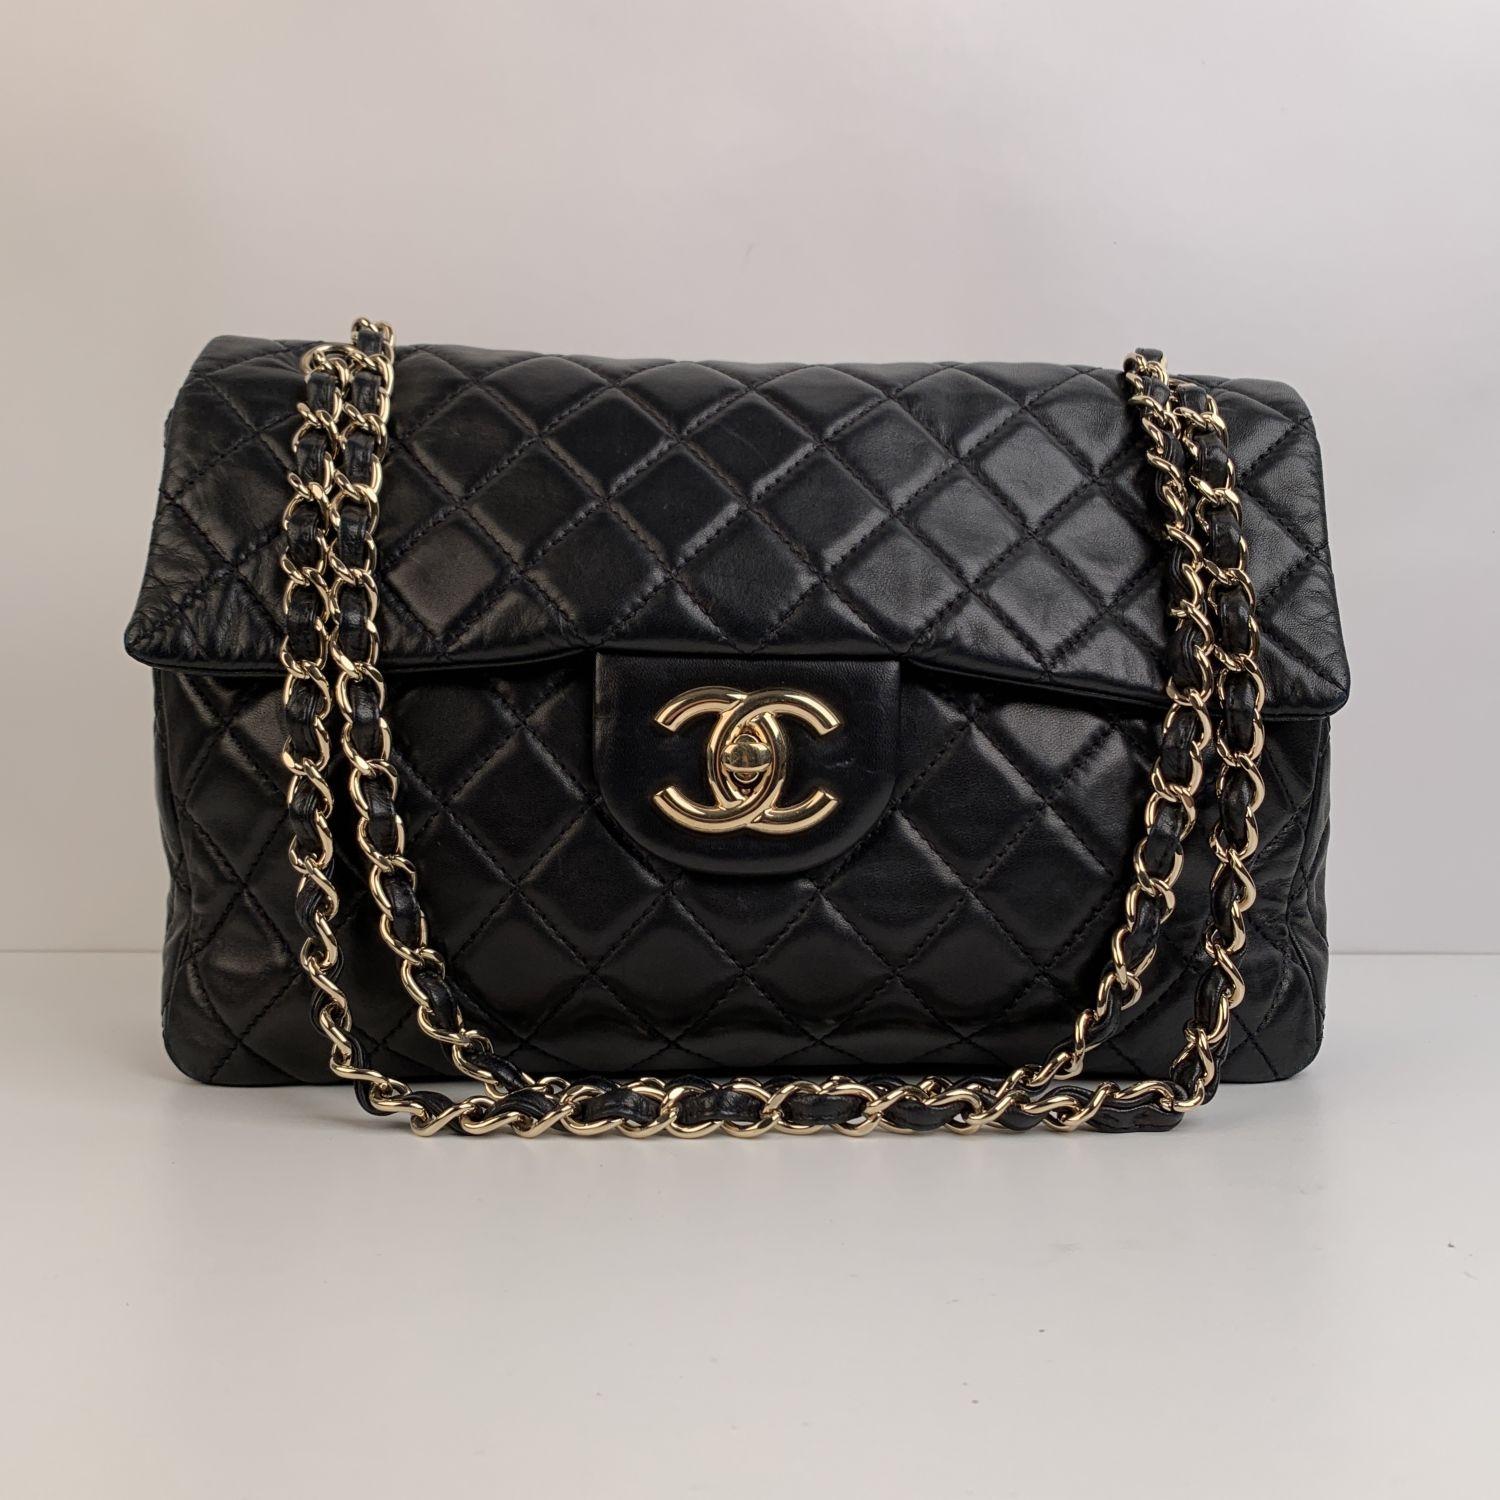 Chanel 'Jumbo' Timeless Classic Flap 2.55 Bag in black quilted leather. Period/Era: 2008-2009. It features double 'CC' turn lock closure and interwoven chain/leather straps; can be worn on the shoulder with double strap or lengthen to wear with one